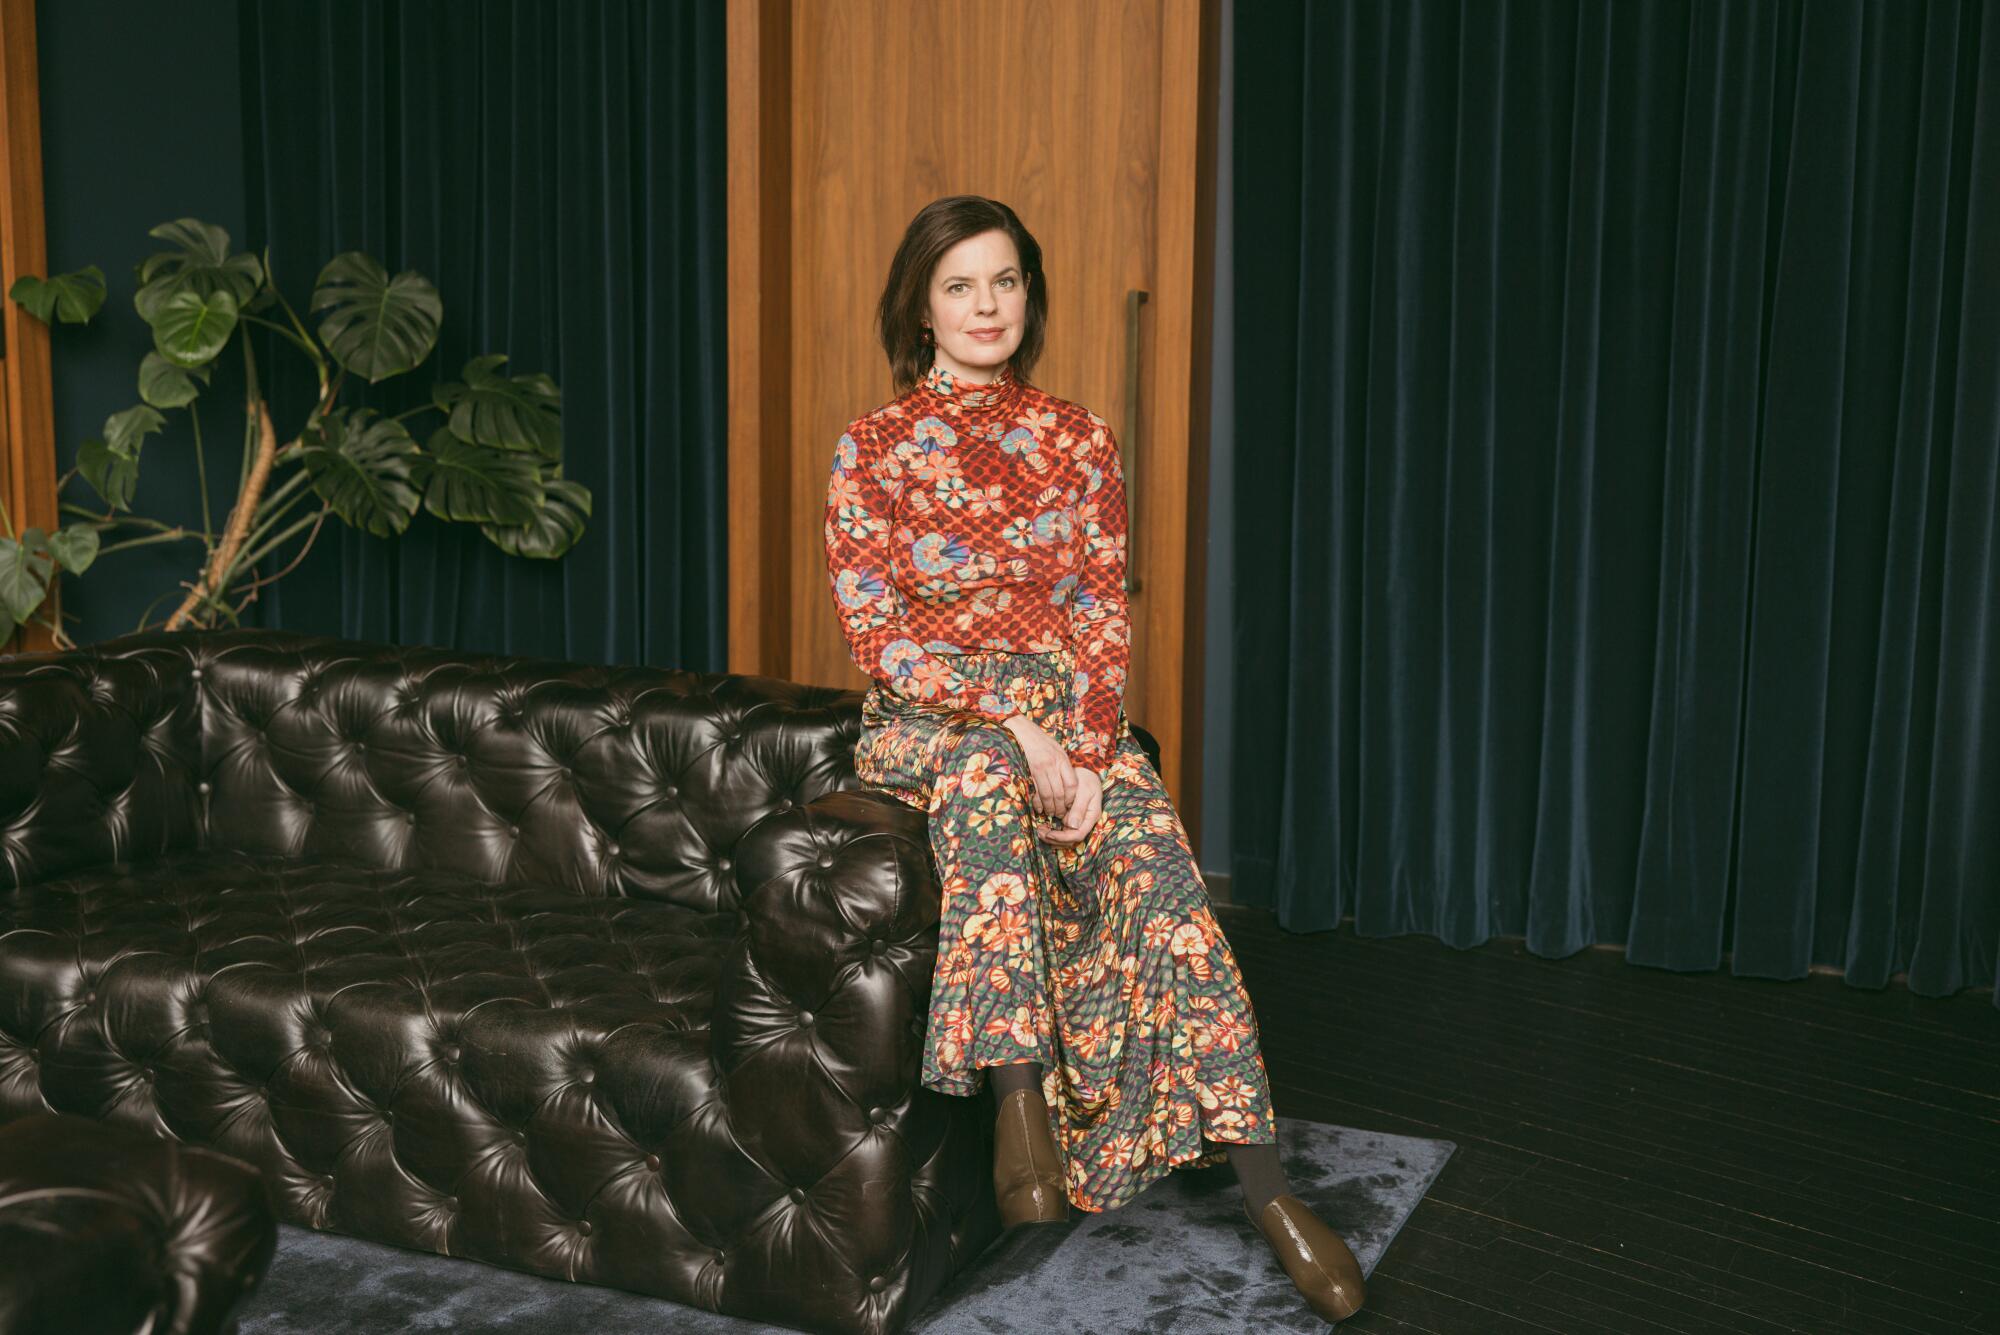 A woman in a floral top and long skirt sits on the edge of a brown leather couch.